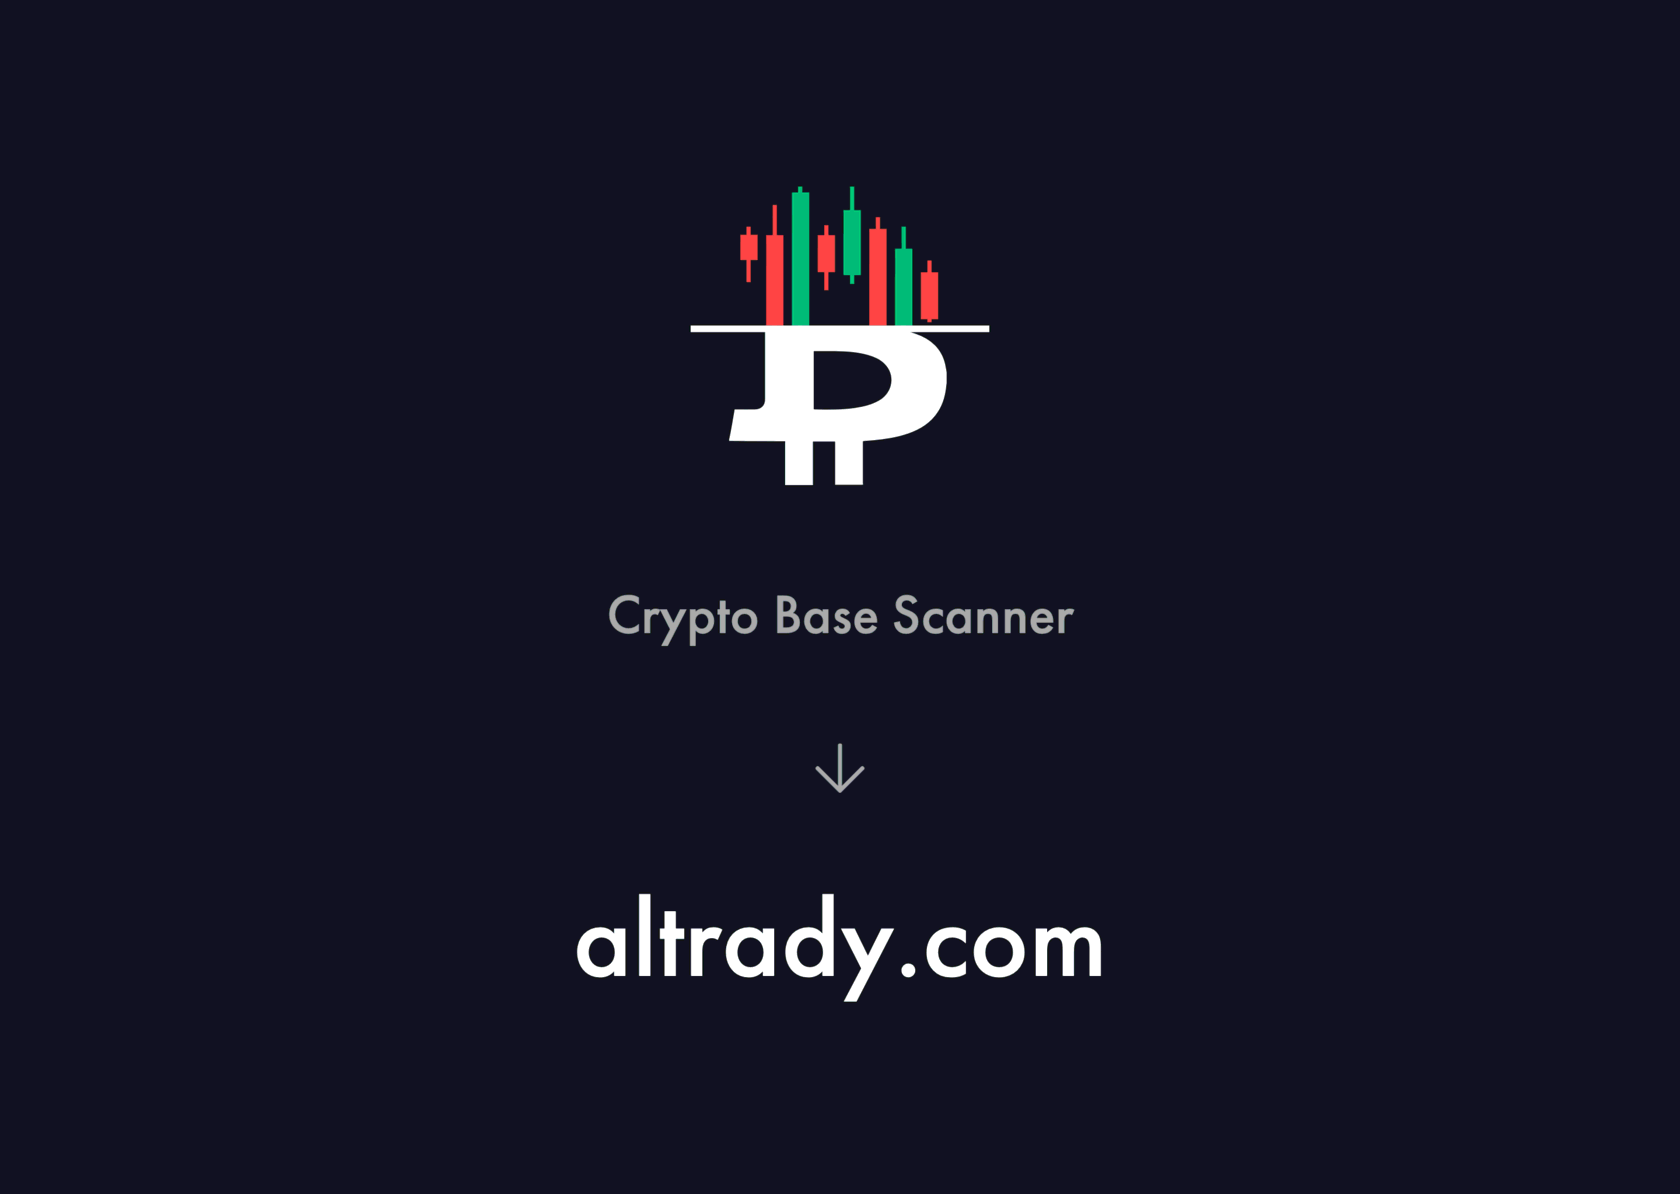 Our Journey from Crypto Base Scanner to altrady